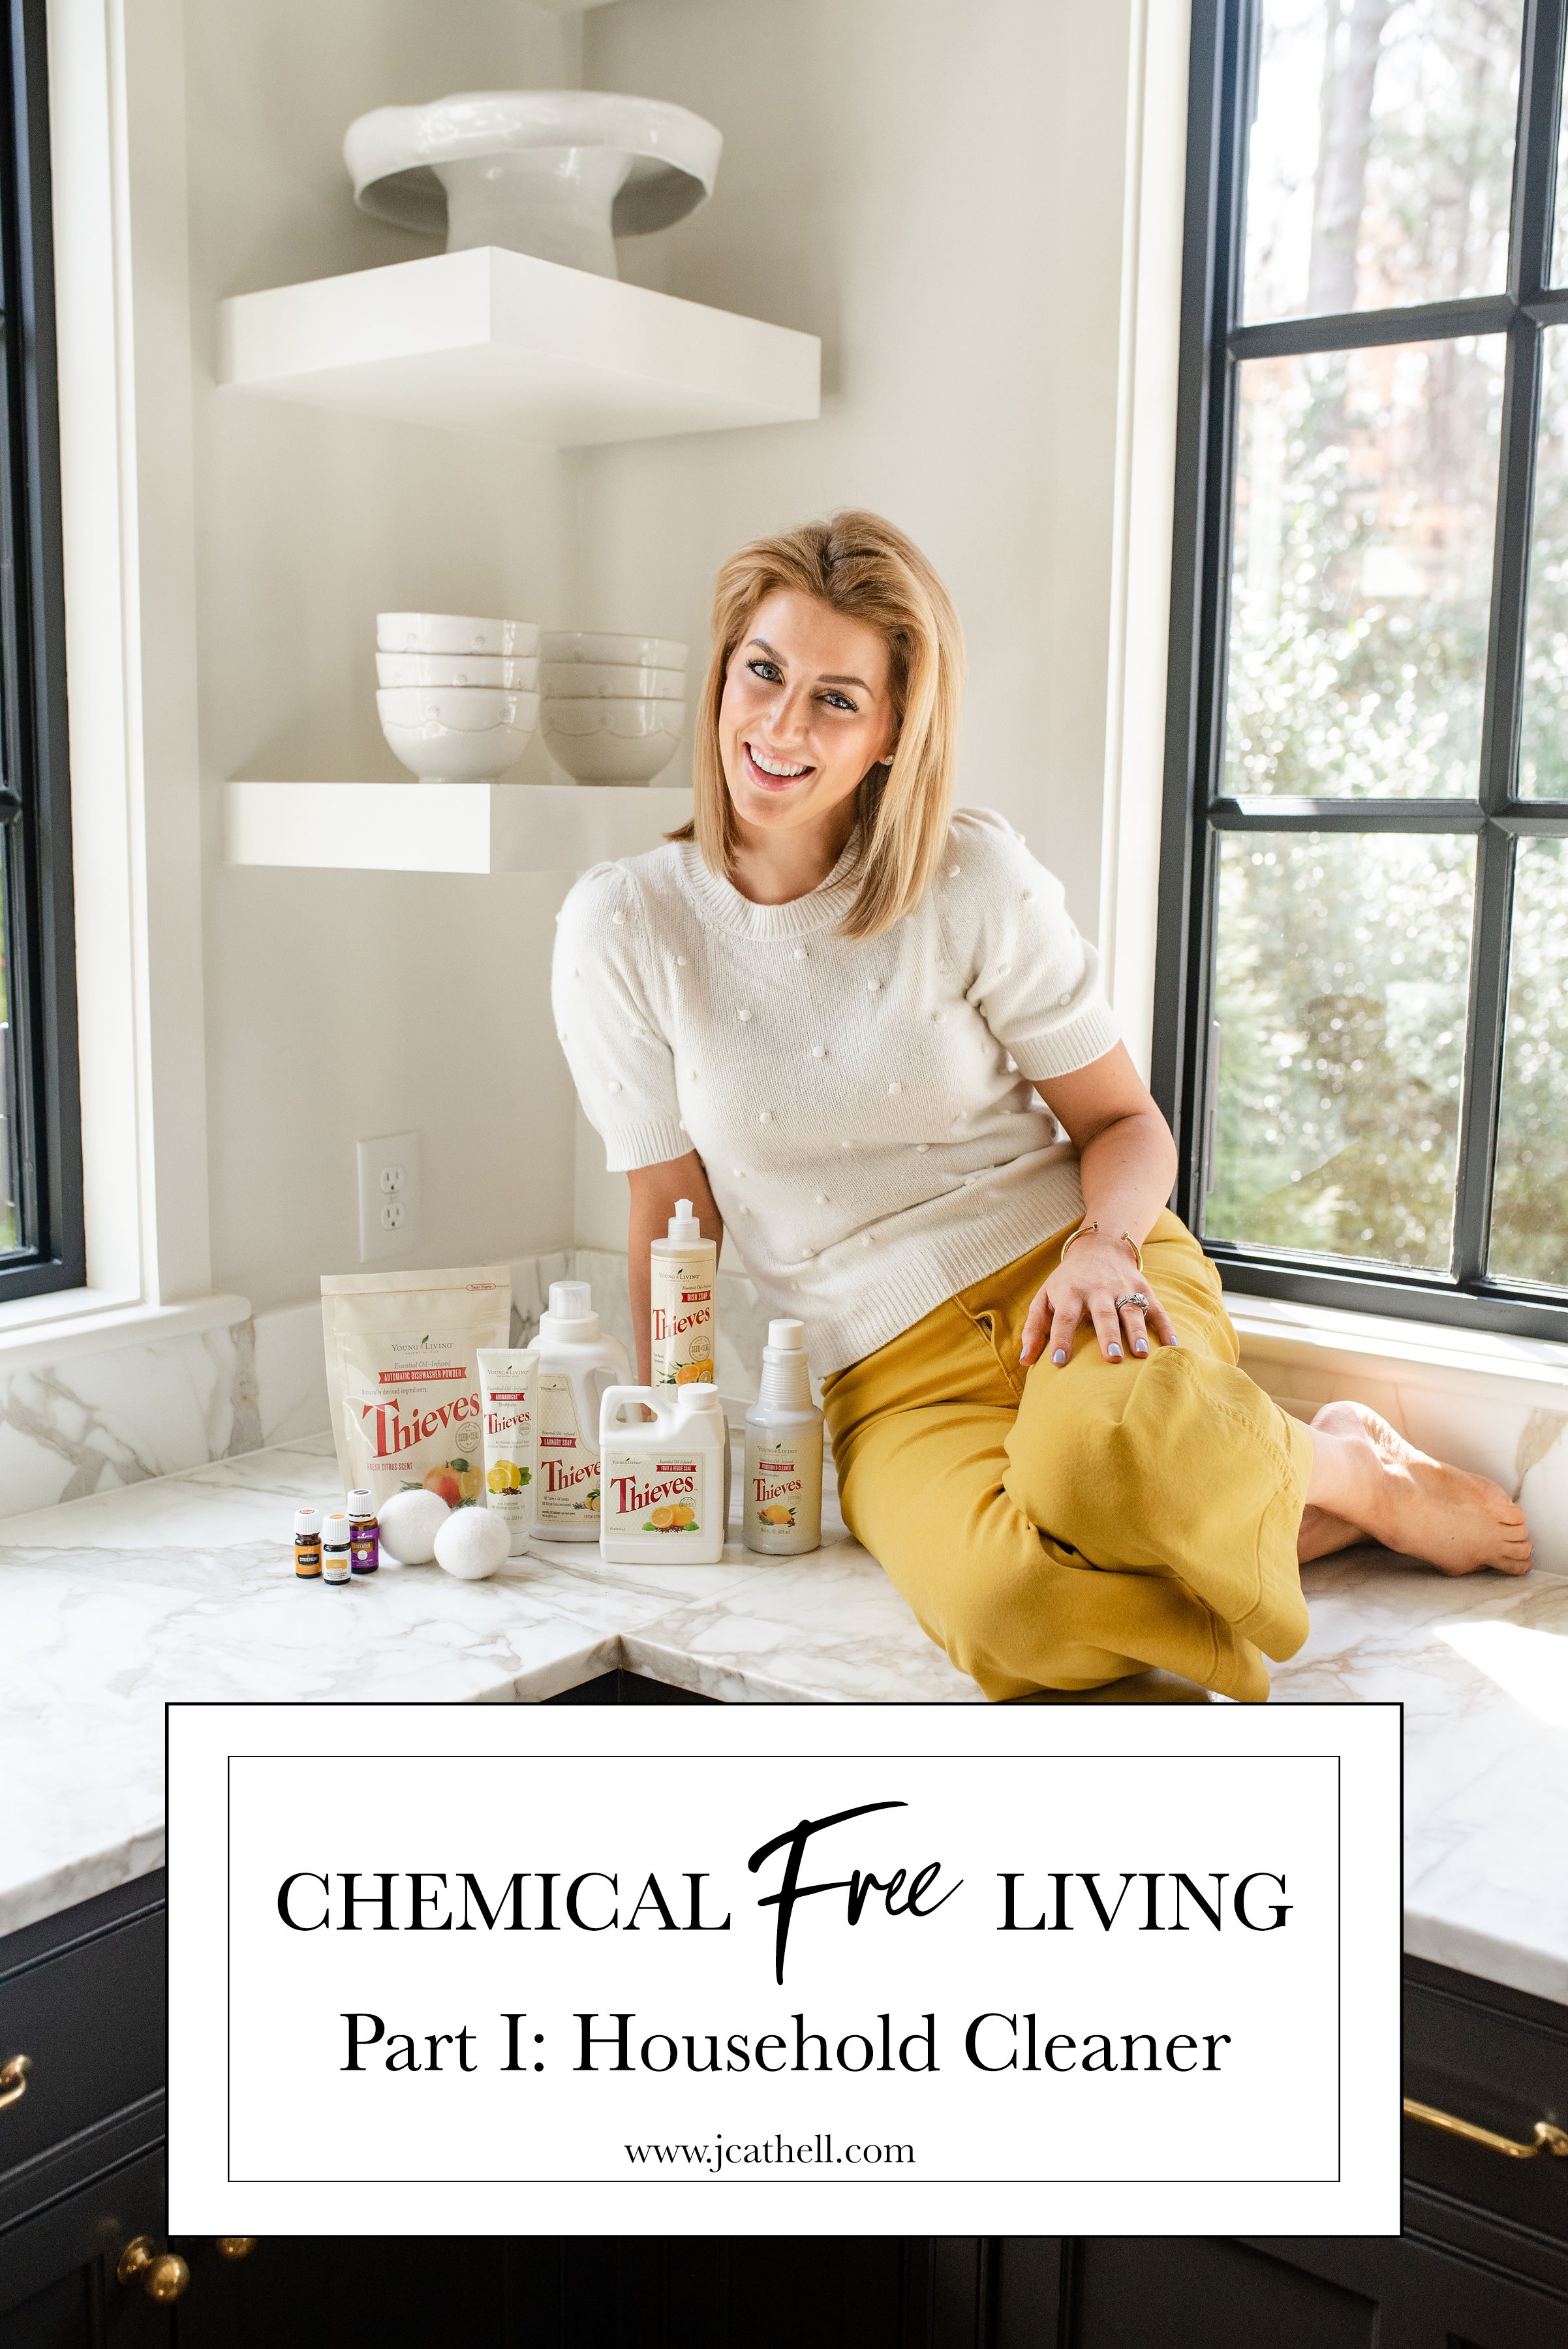 CHEMICAL FREE LIVING